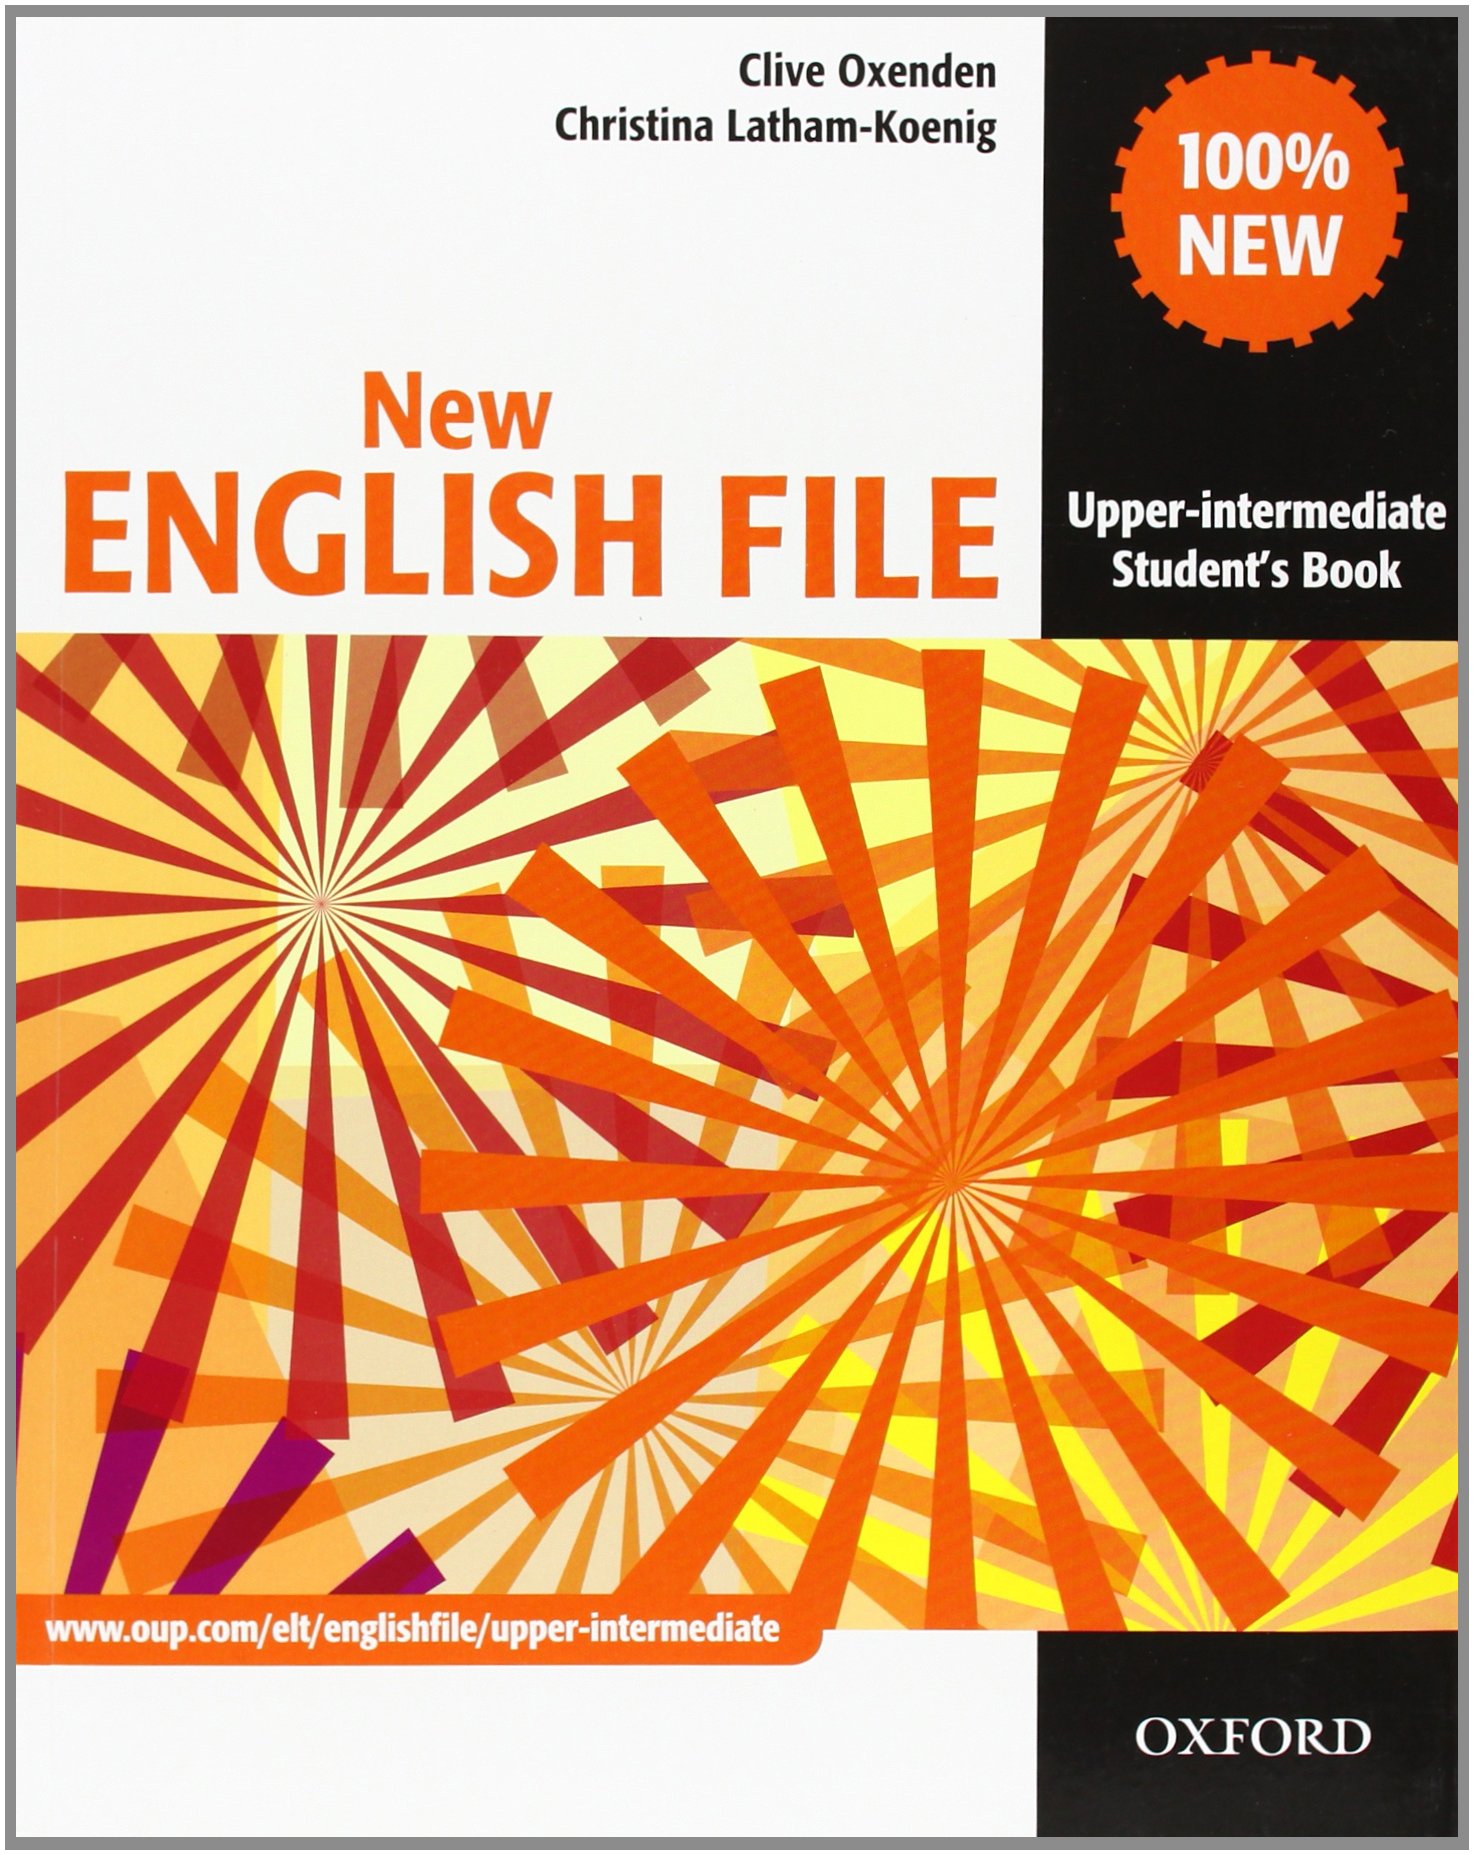 New english file video. Clive Oxenden Christina Latham-Koenig New English file. New English file 100% New Oxford Upper-Intermediate. Oxford English file Intermediate student's book Christina Latham Koenig. Oxford English file Elementary Christina Latham-Koenig Clive Oxenden.